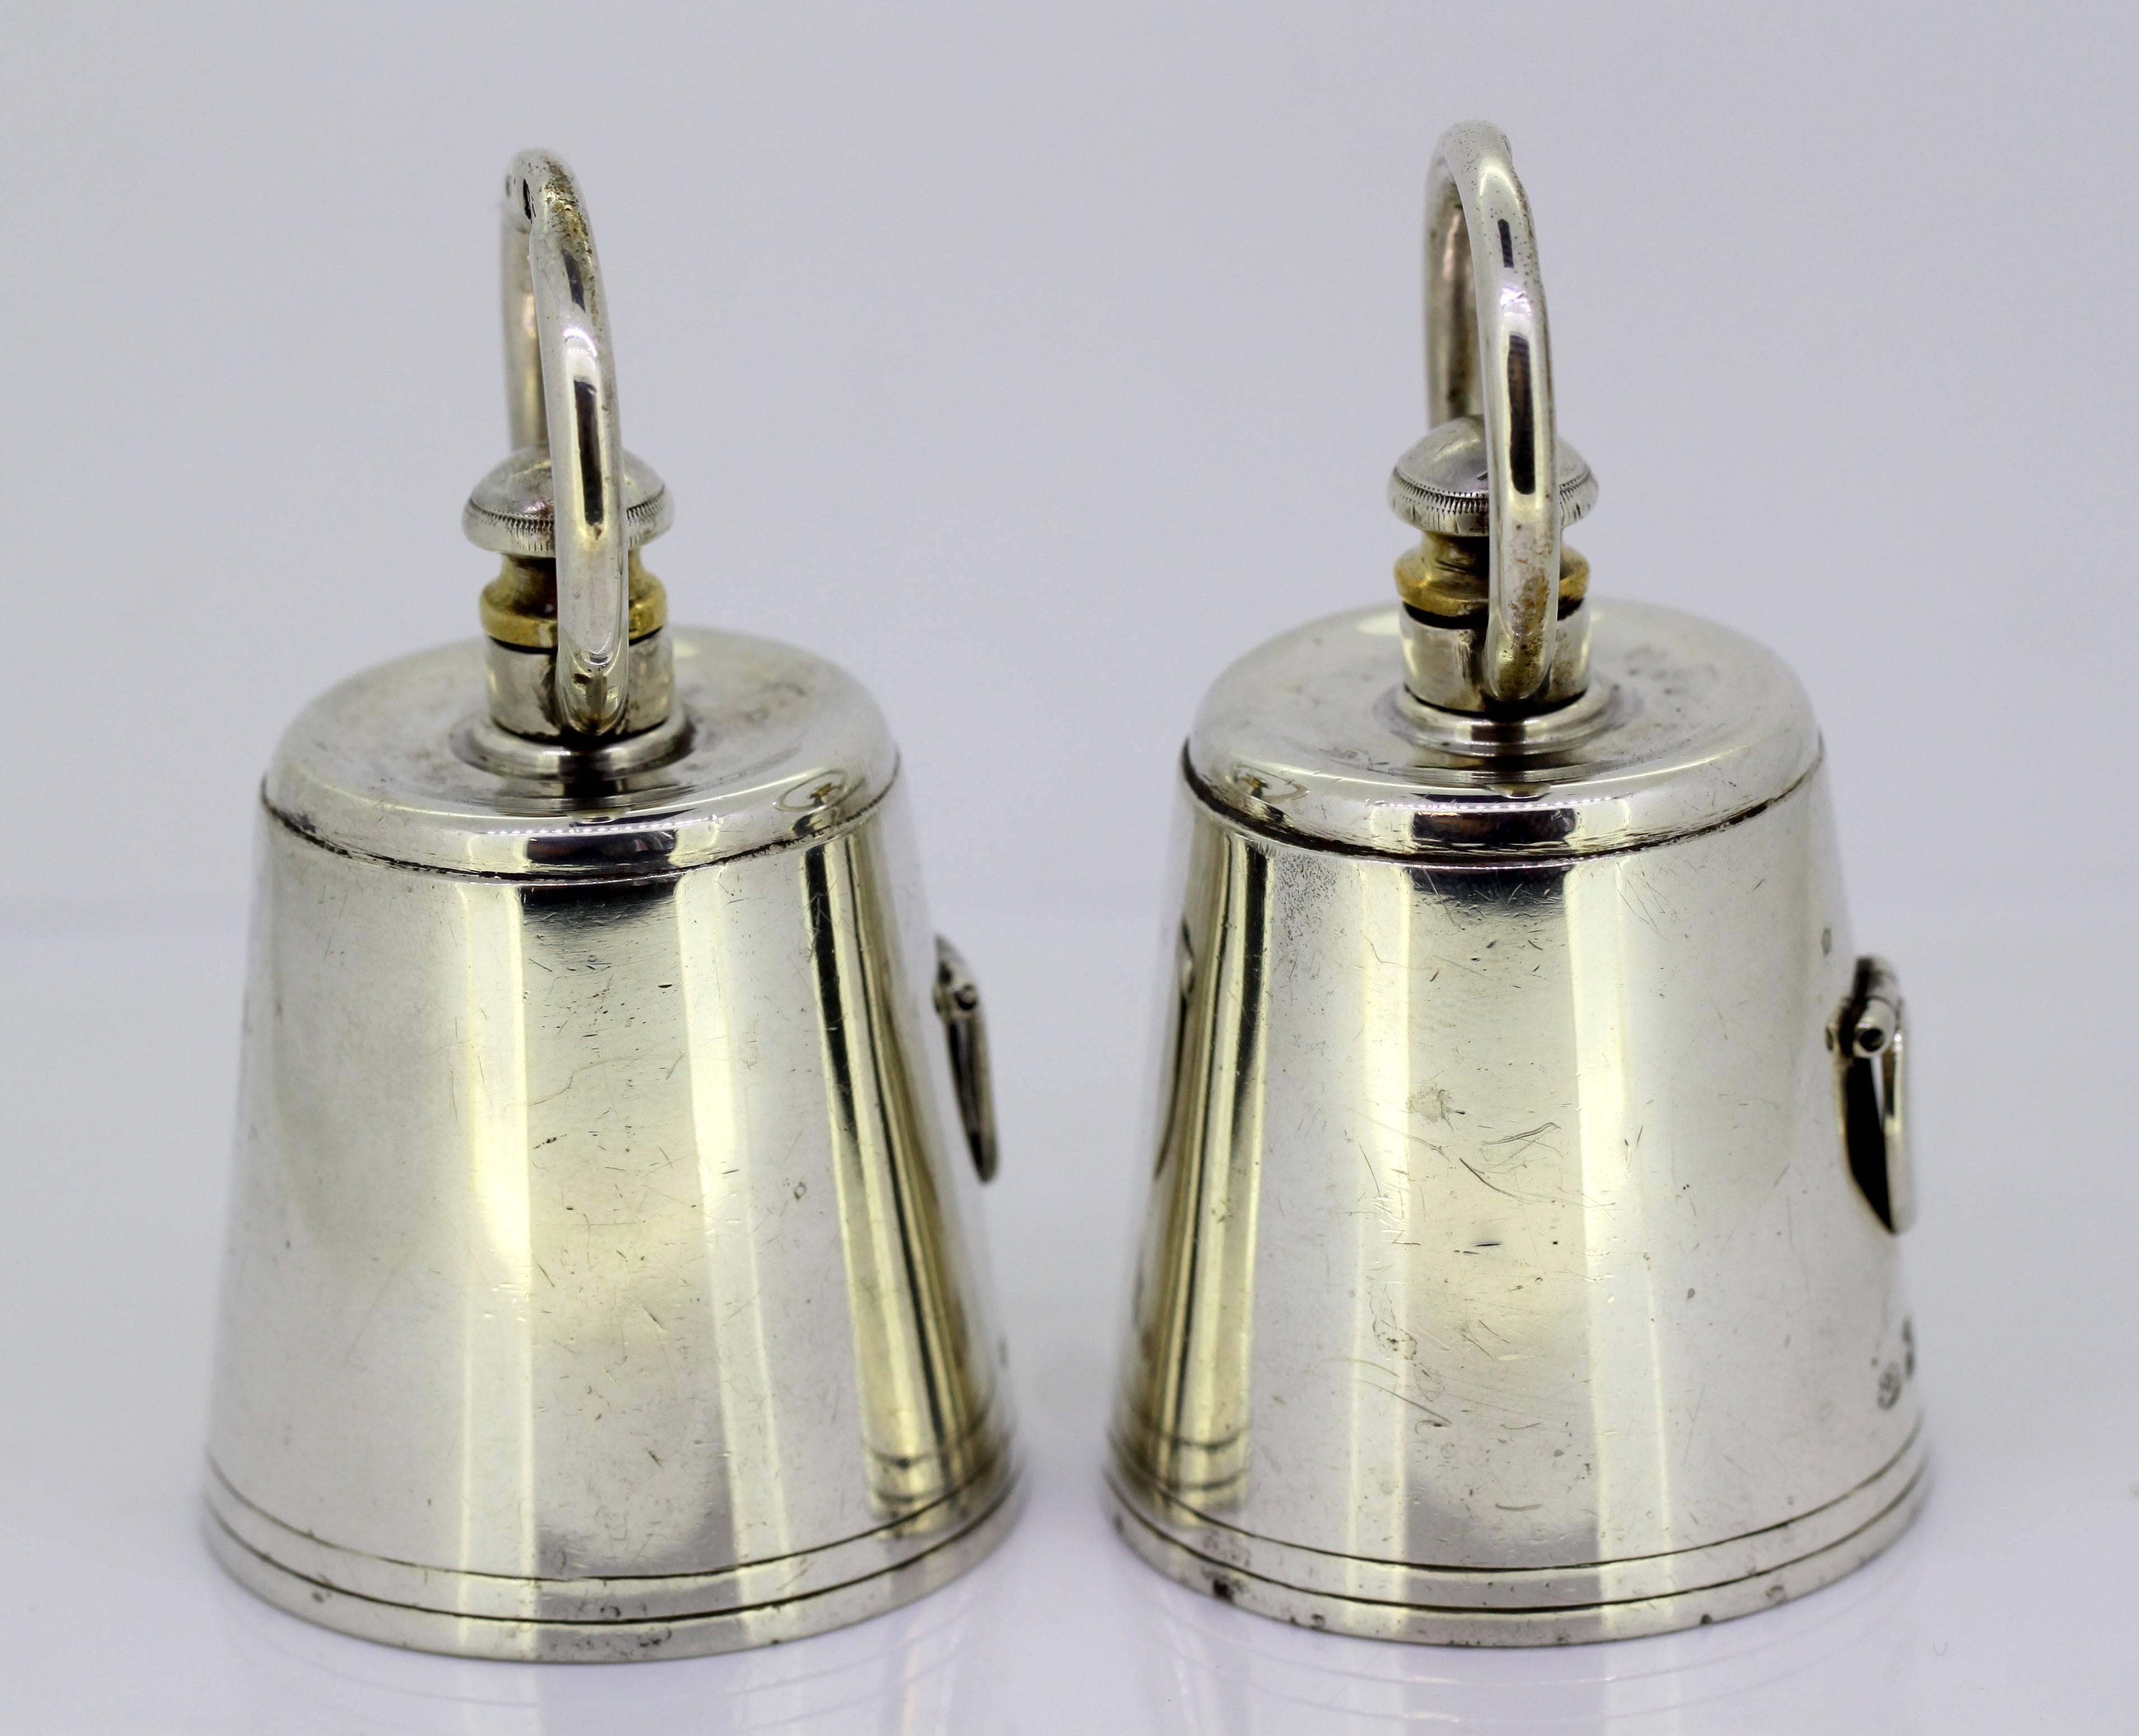 Antique sterling silver pair of salt and pepper grinders in form of bells
Maker: Joseph Braham
Made in London 1901
Fully hallmarked.

Approximate dimensions - 
Diameter x height: 5 x 8.3 cm
Weight: 275 grams total

Condition: Surface wear